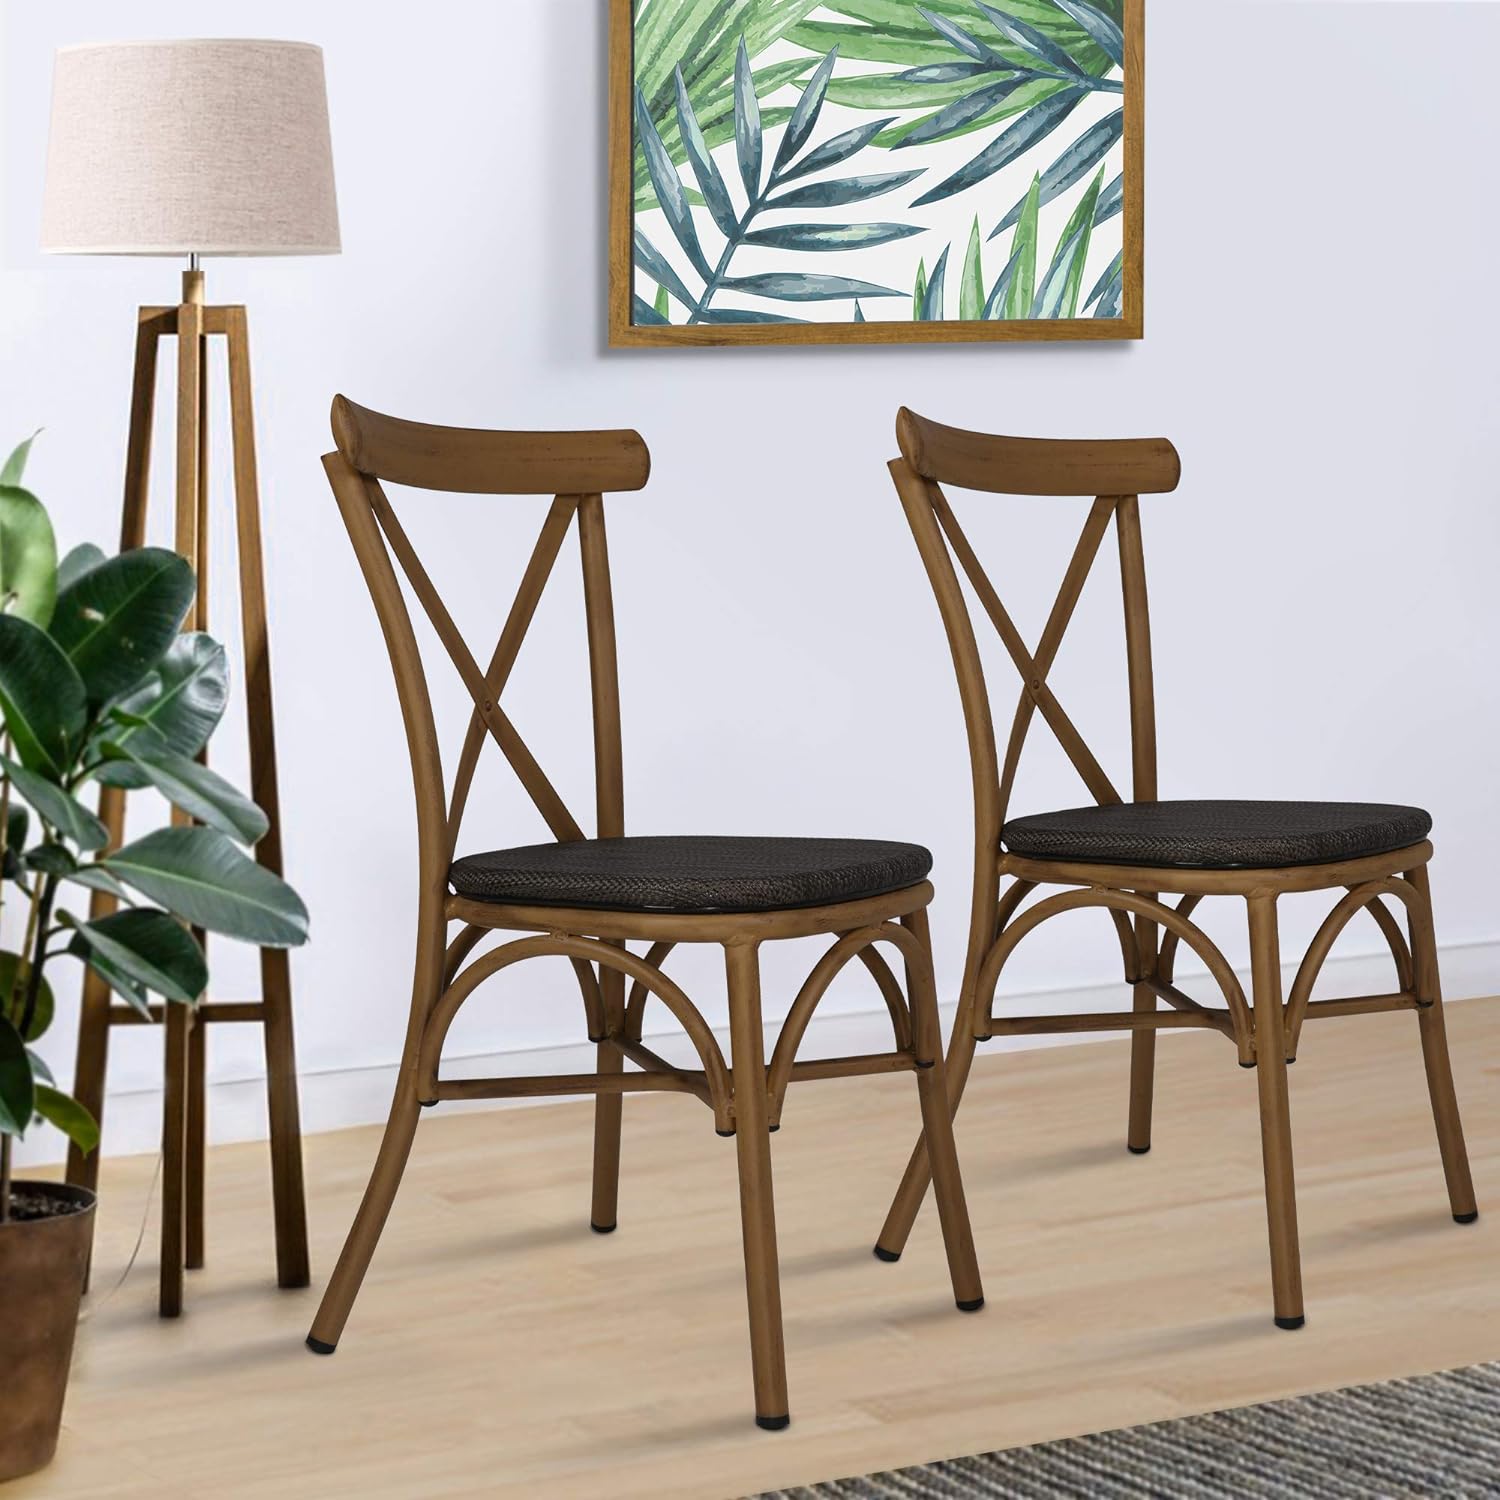 Set of 2 Modern Dining Chairs with Aluminum Frame and Textile Fabric, X Back